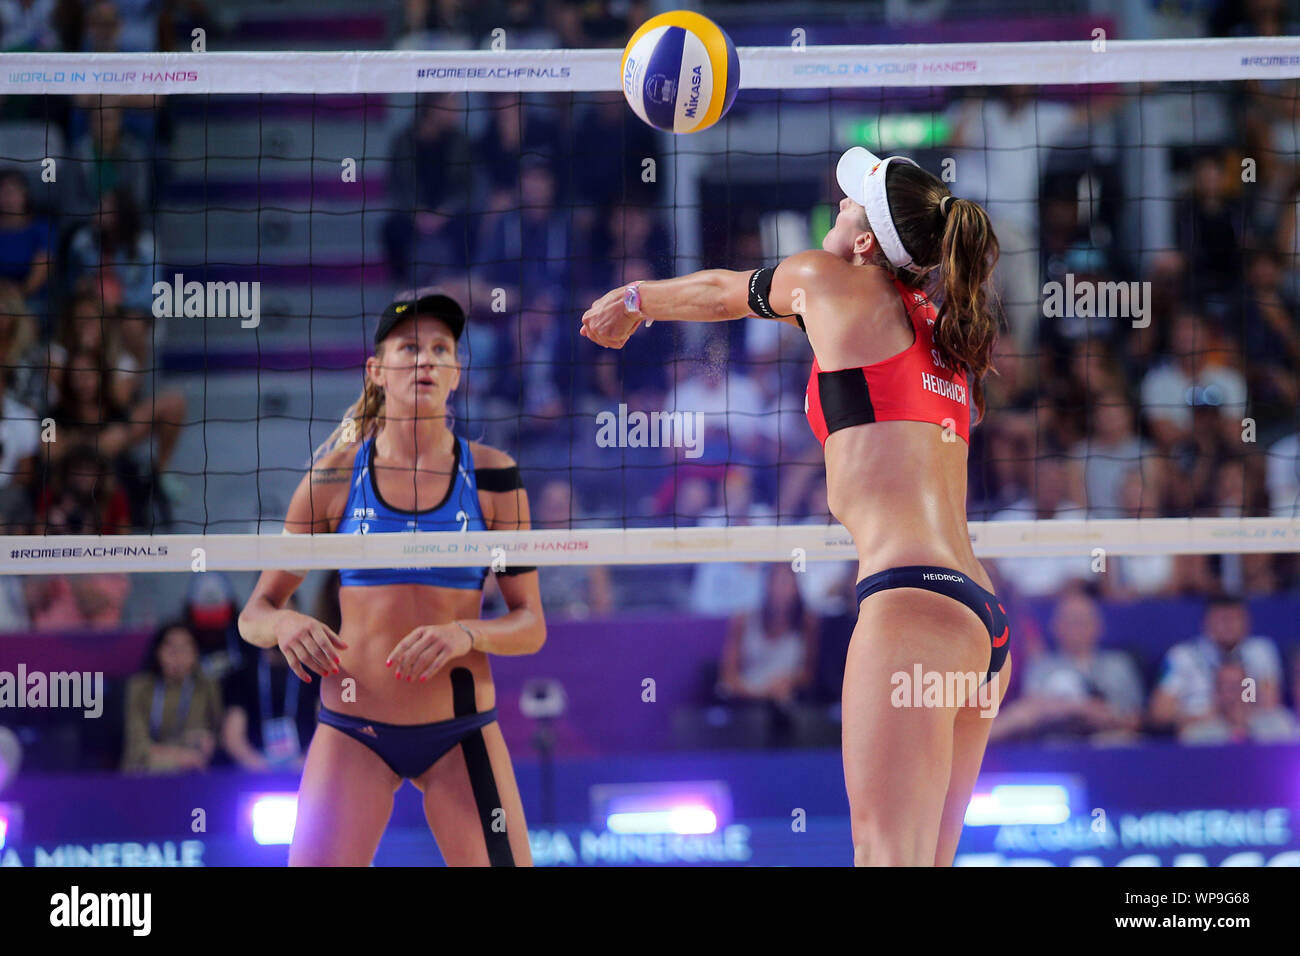 Rome, Italy - September 07,2019:Heidrich/Verge-Depre and Ludwig Kozuch during the Semifinals - Women FIVB World Tour Rome Beach Volley Finals 2018/2019, Olympic qualifiers match Swiss v Germany, at Rome Tennis Stadium. Stock Photo